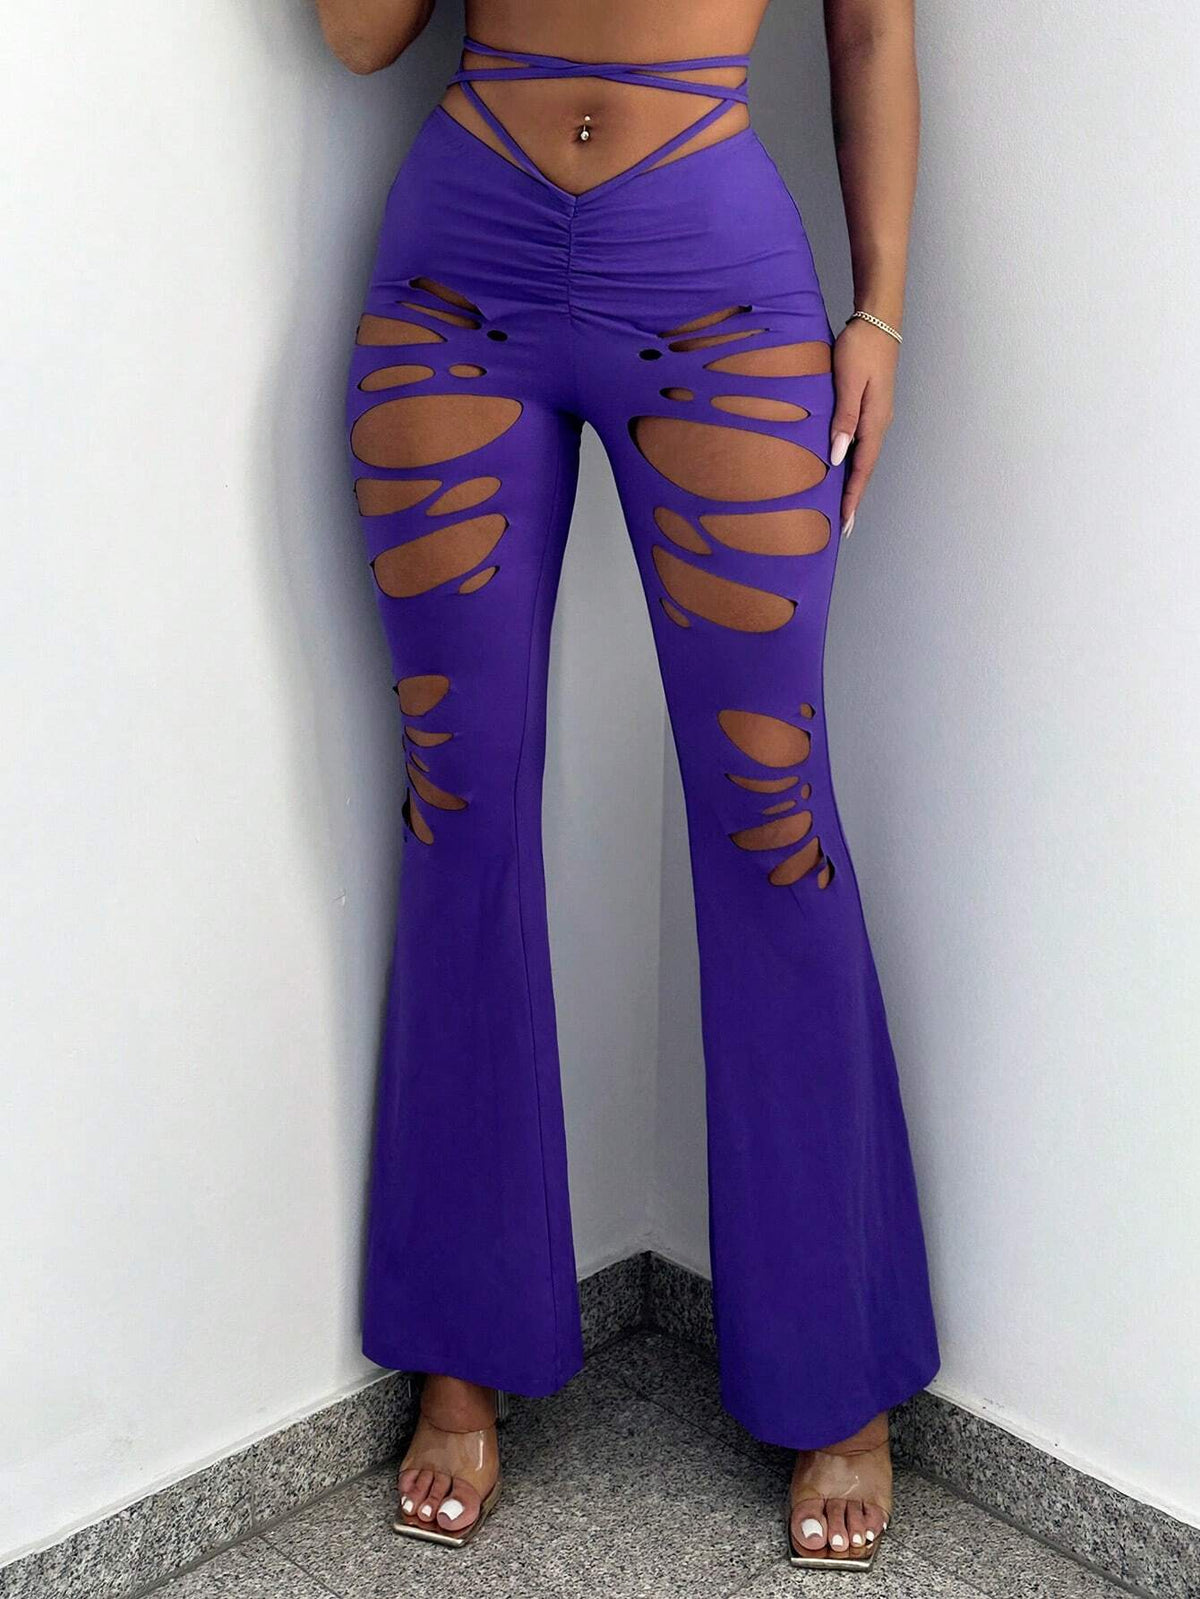 ICON Cut Out Criss Cross Tie Back Ruched Flare Leg Pants